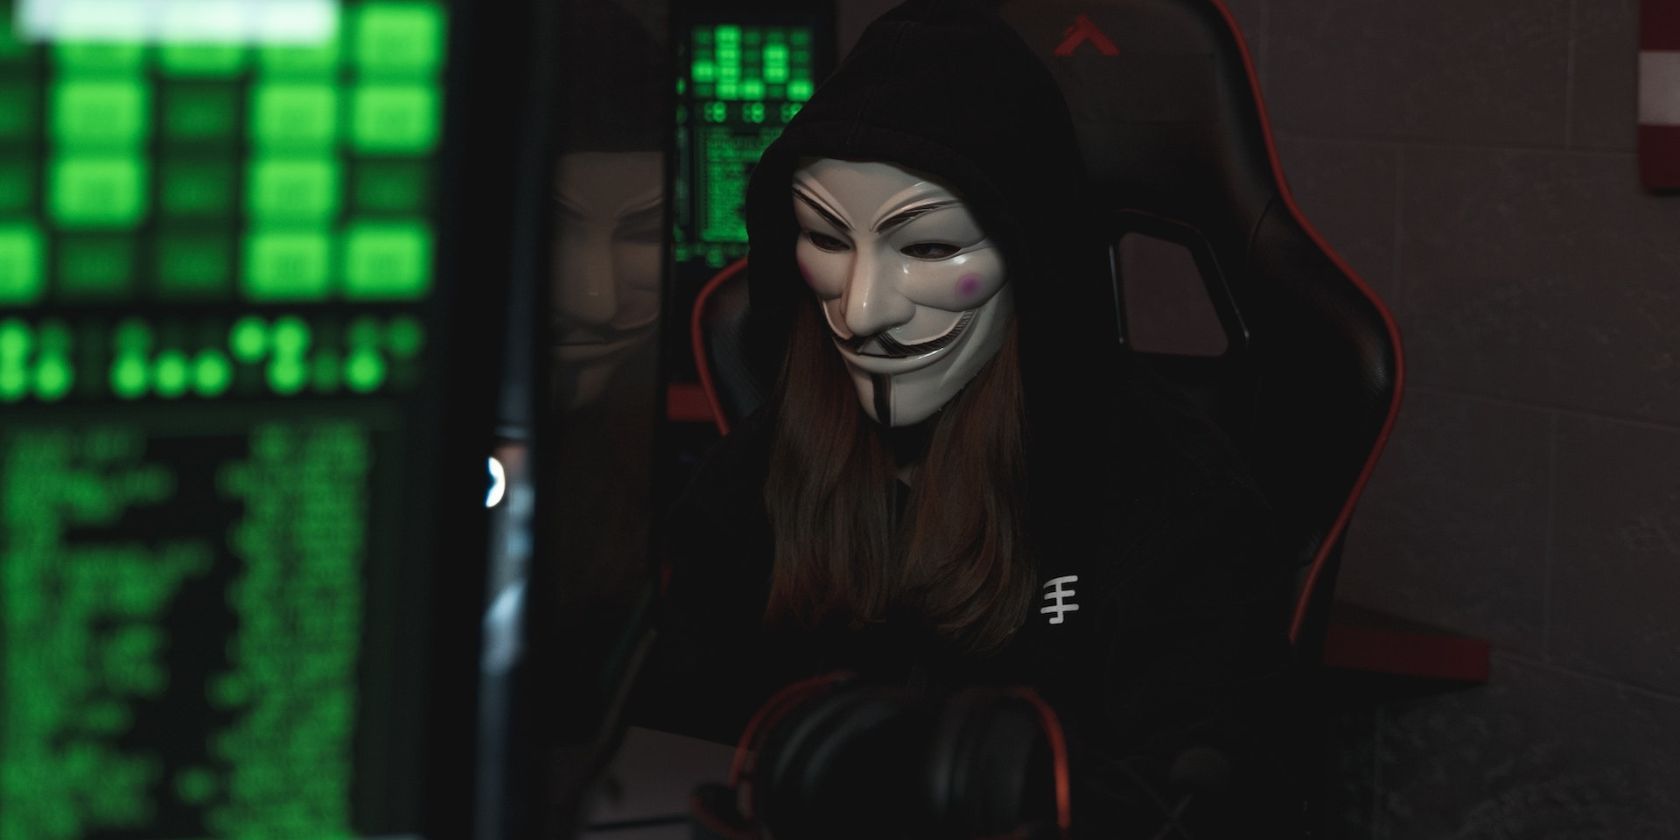 anonymous cybercriminal in a hoodie